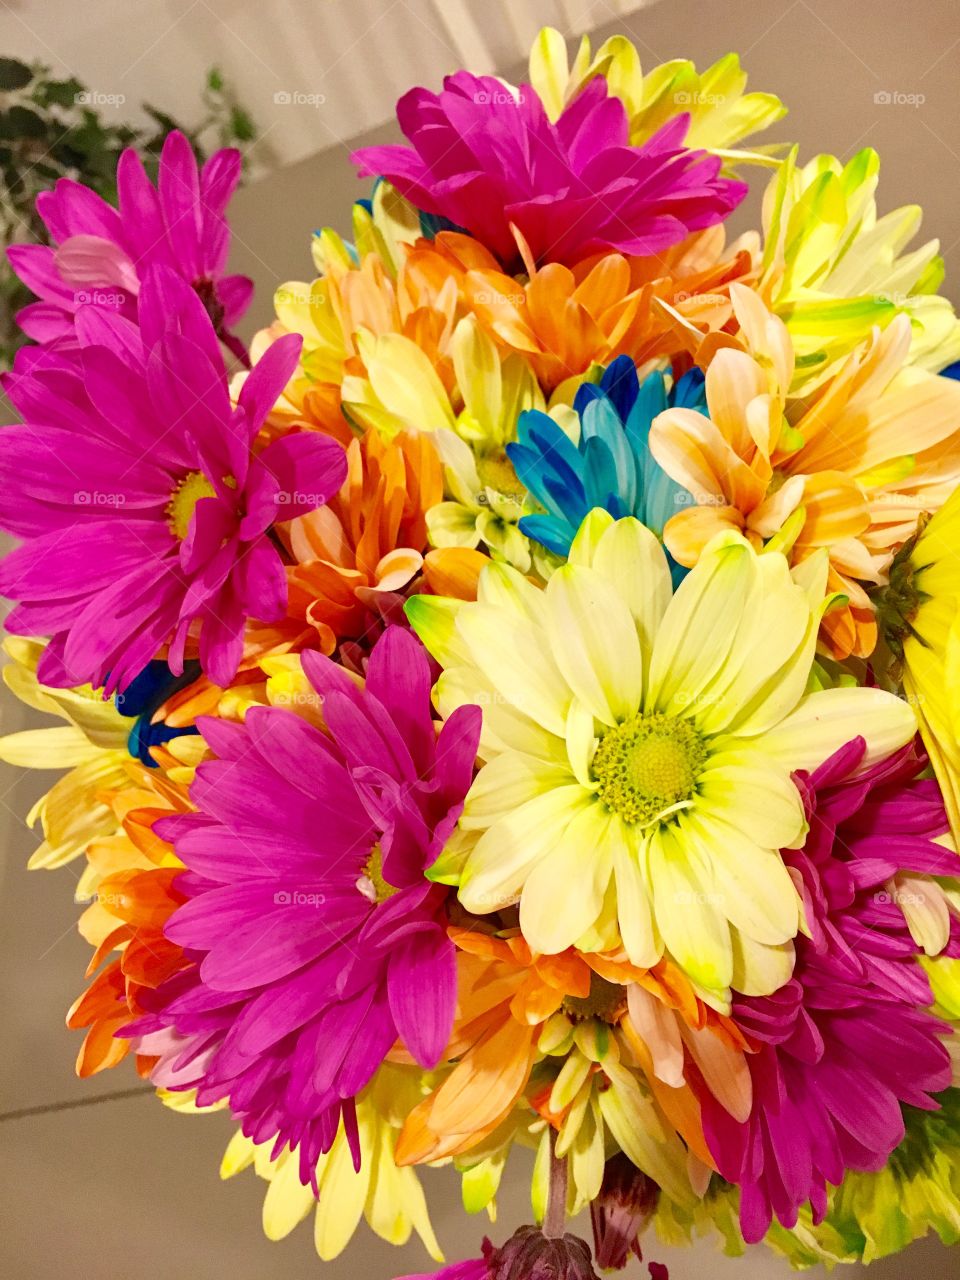 Bright colorful flowers